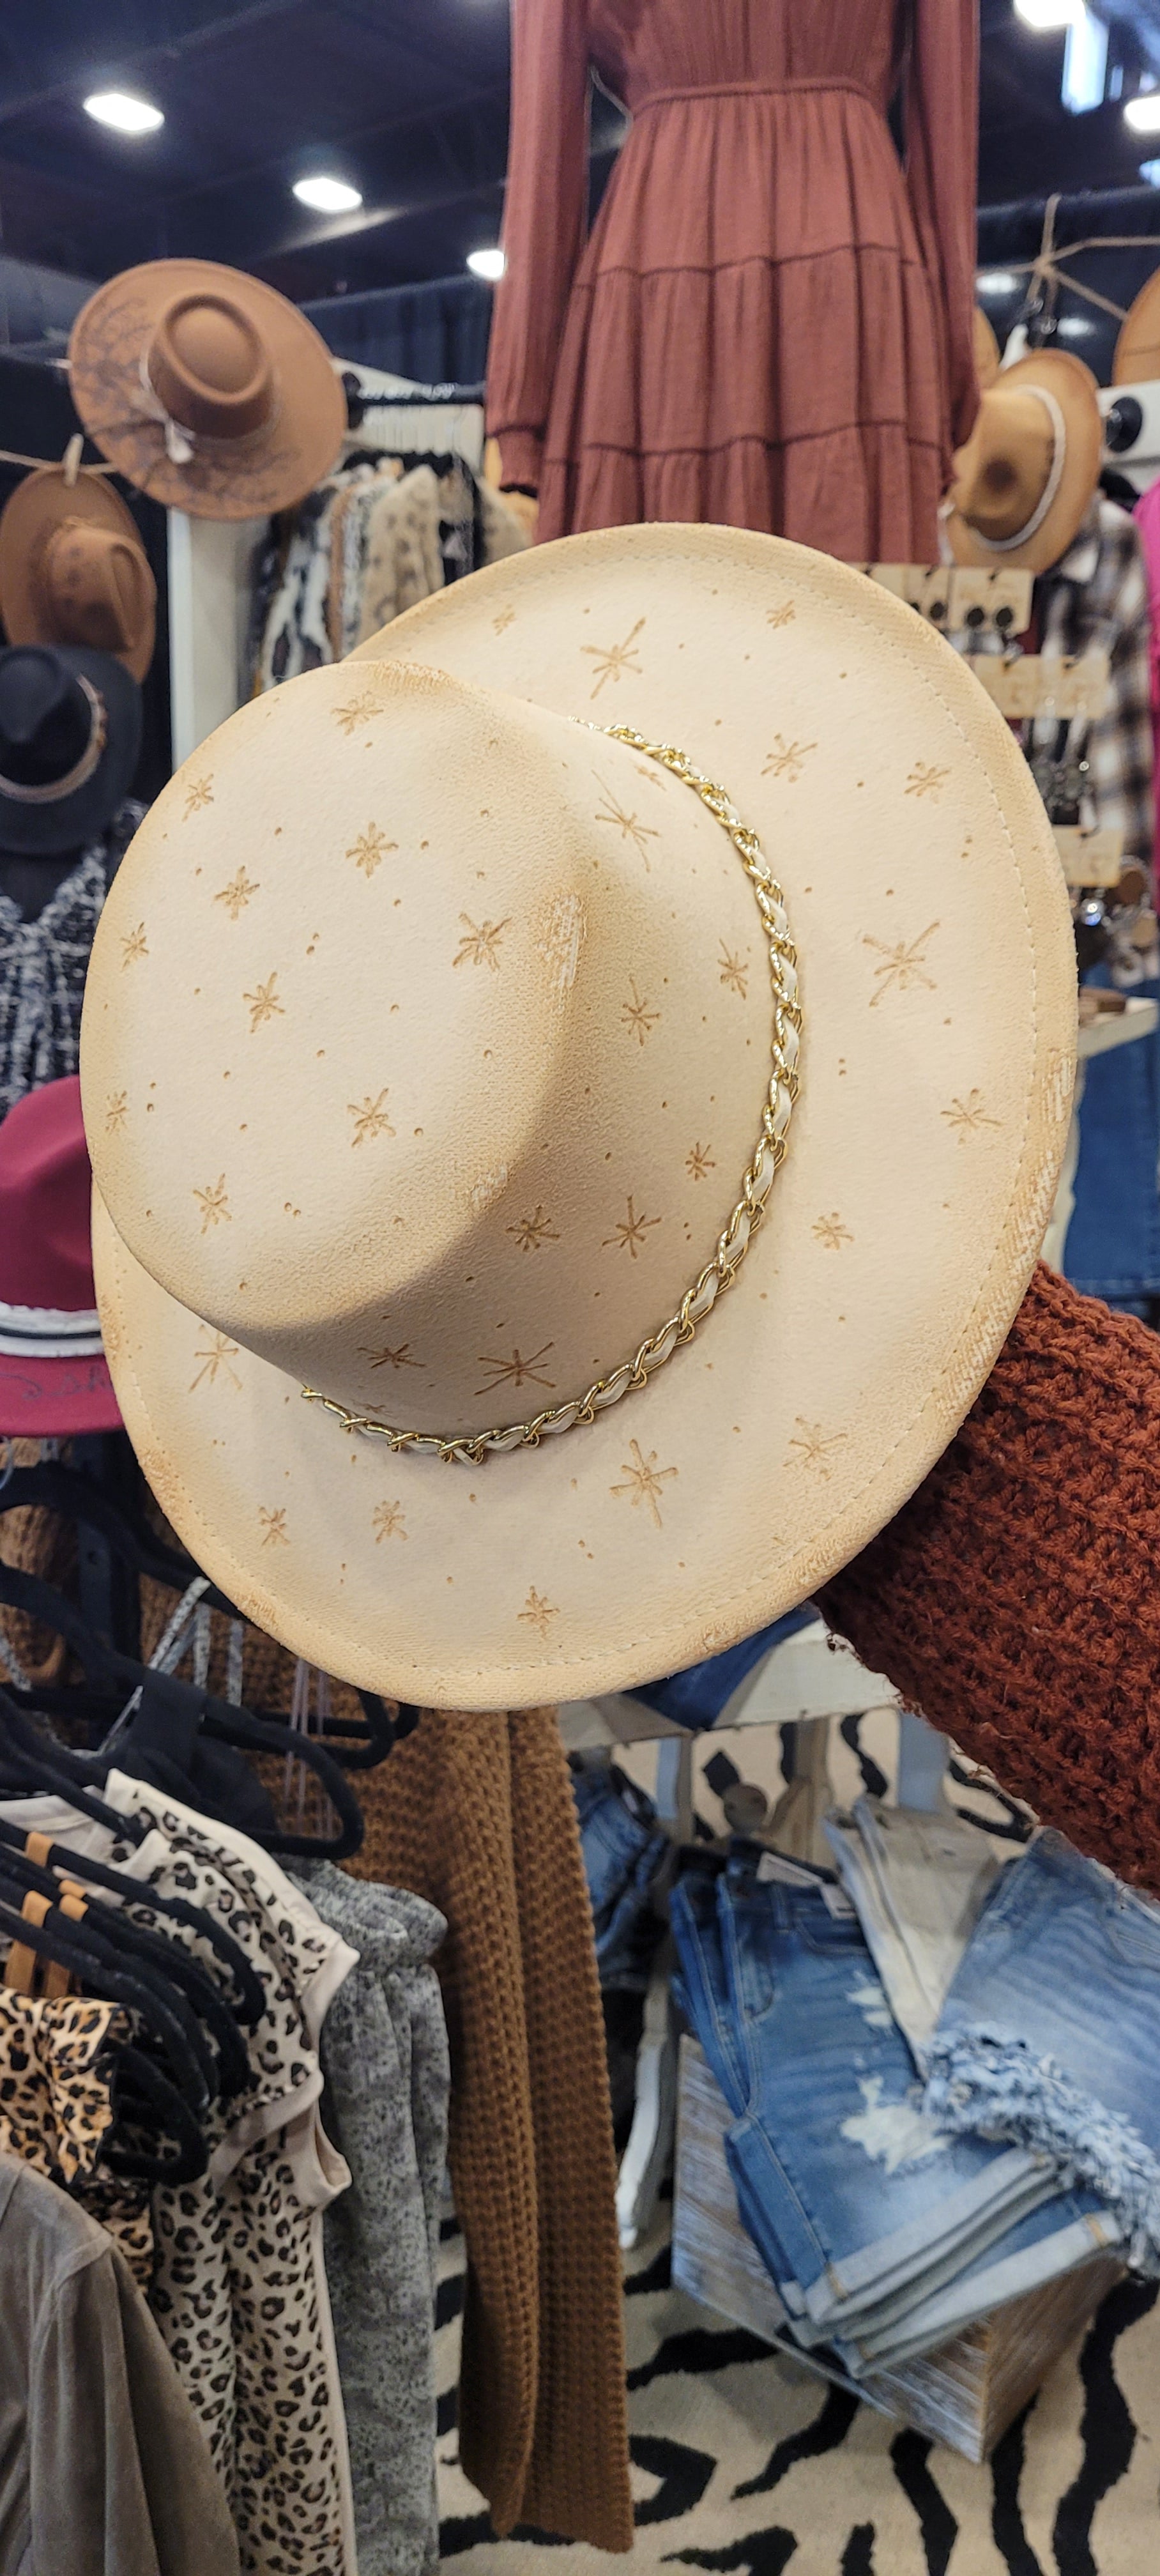 Features engraved stars Chain with a faux leather Felt hat Flat brim 100% polyester Ribbon drawstring for hat size adjustment Head Circumference: 24" Crown Height: 3.5" Brim Length: 13.5" Brim Width: 12.75" Branded & numbered inside crown Custom burned & engraved by Kayla